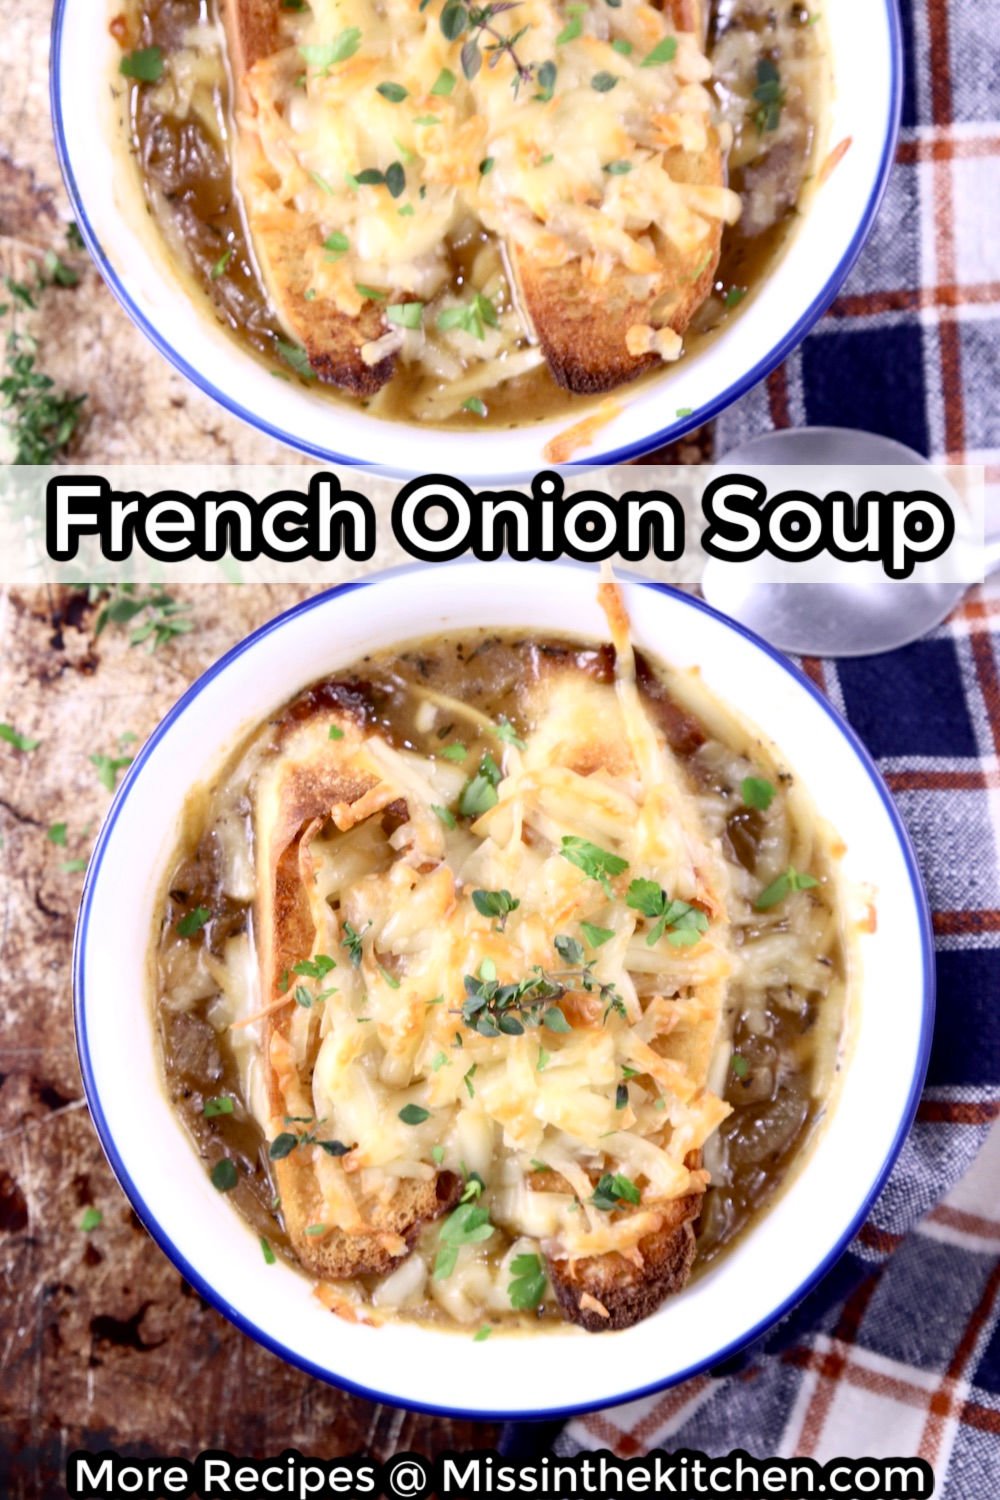 French Onion Soup 2 bowls close up with text overlay